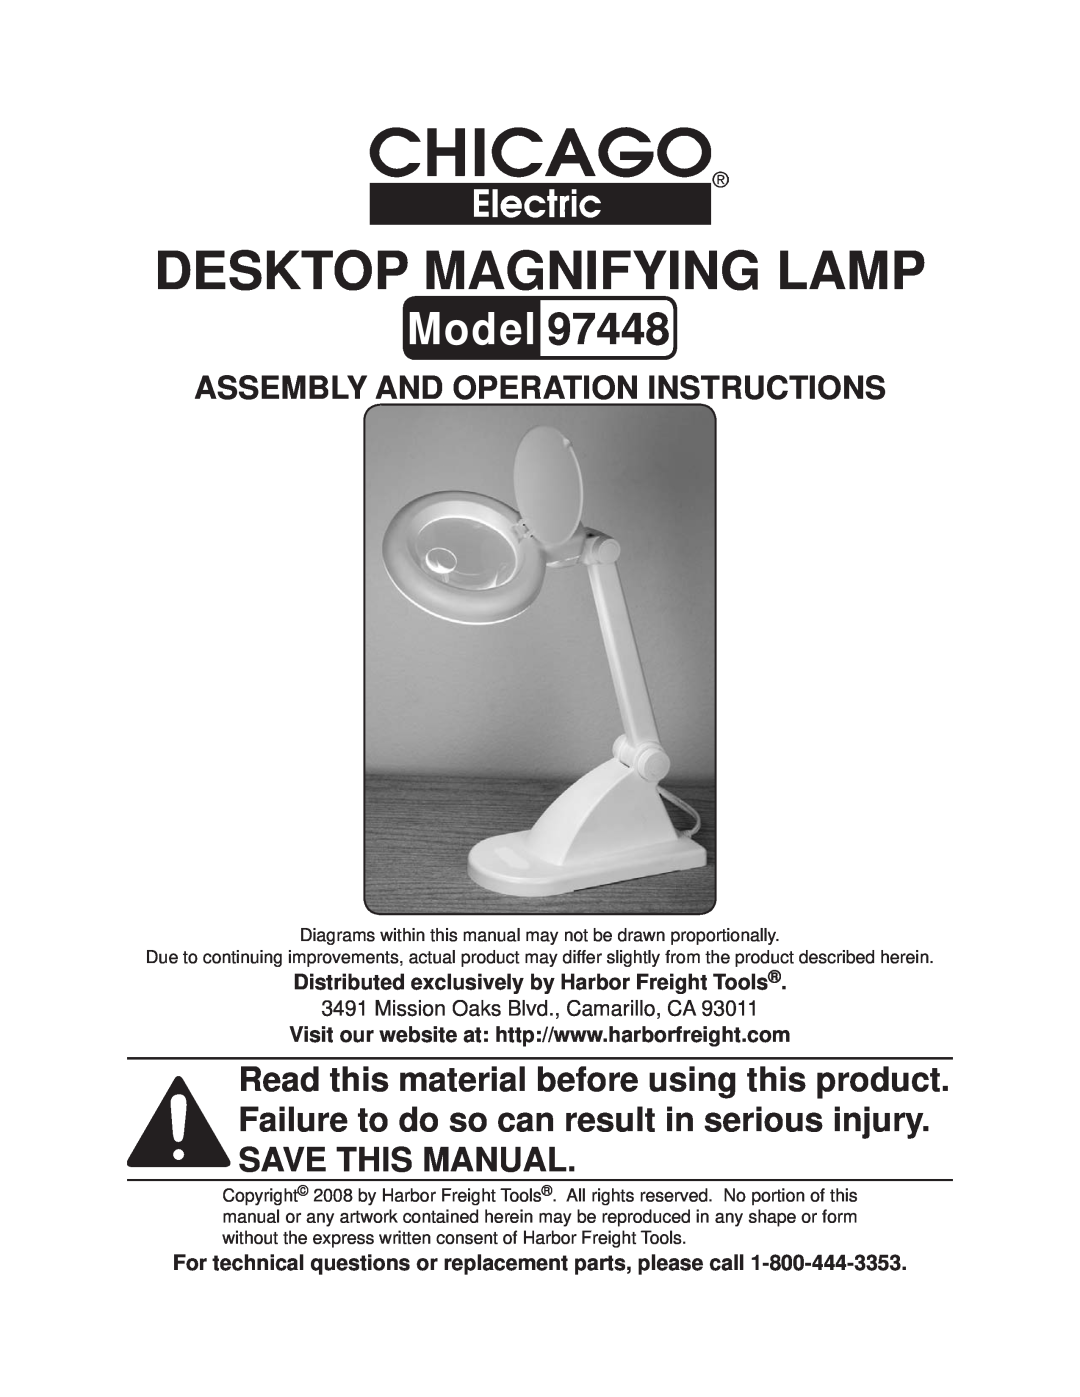 Chicago Electric 97448 manual Desktop Magnifying Lamp, Assembly And Operation Instructions, Model 